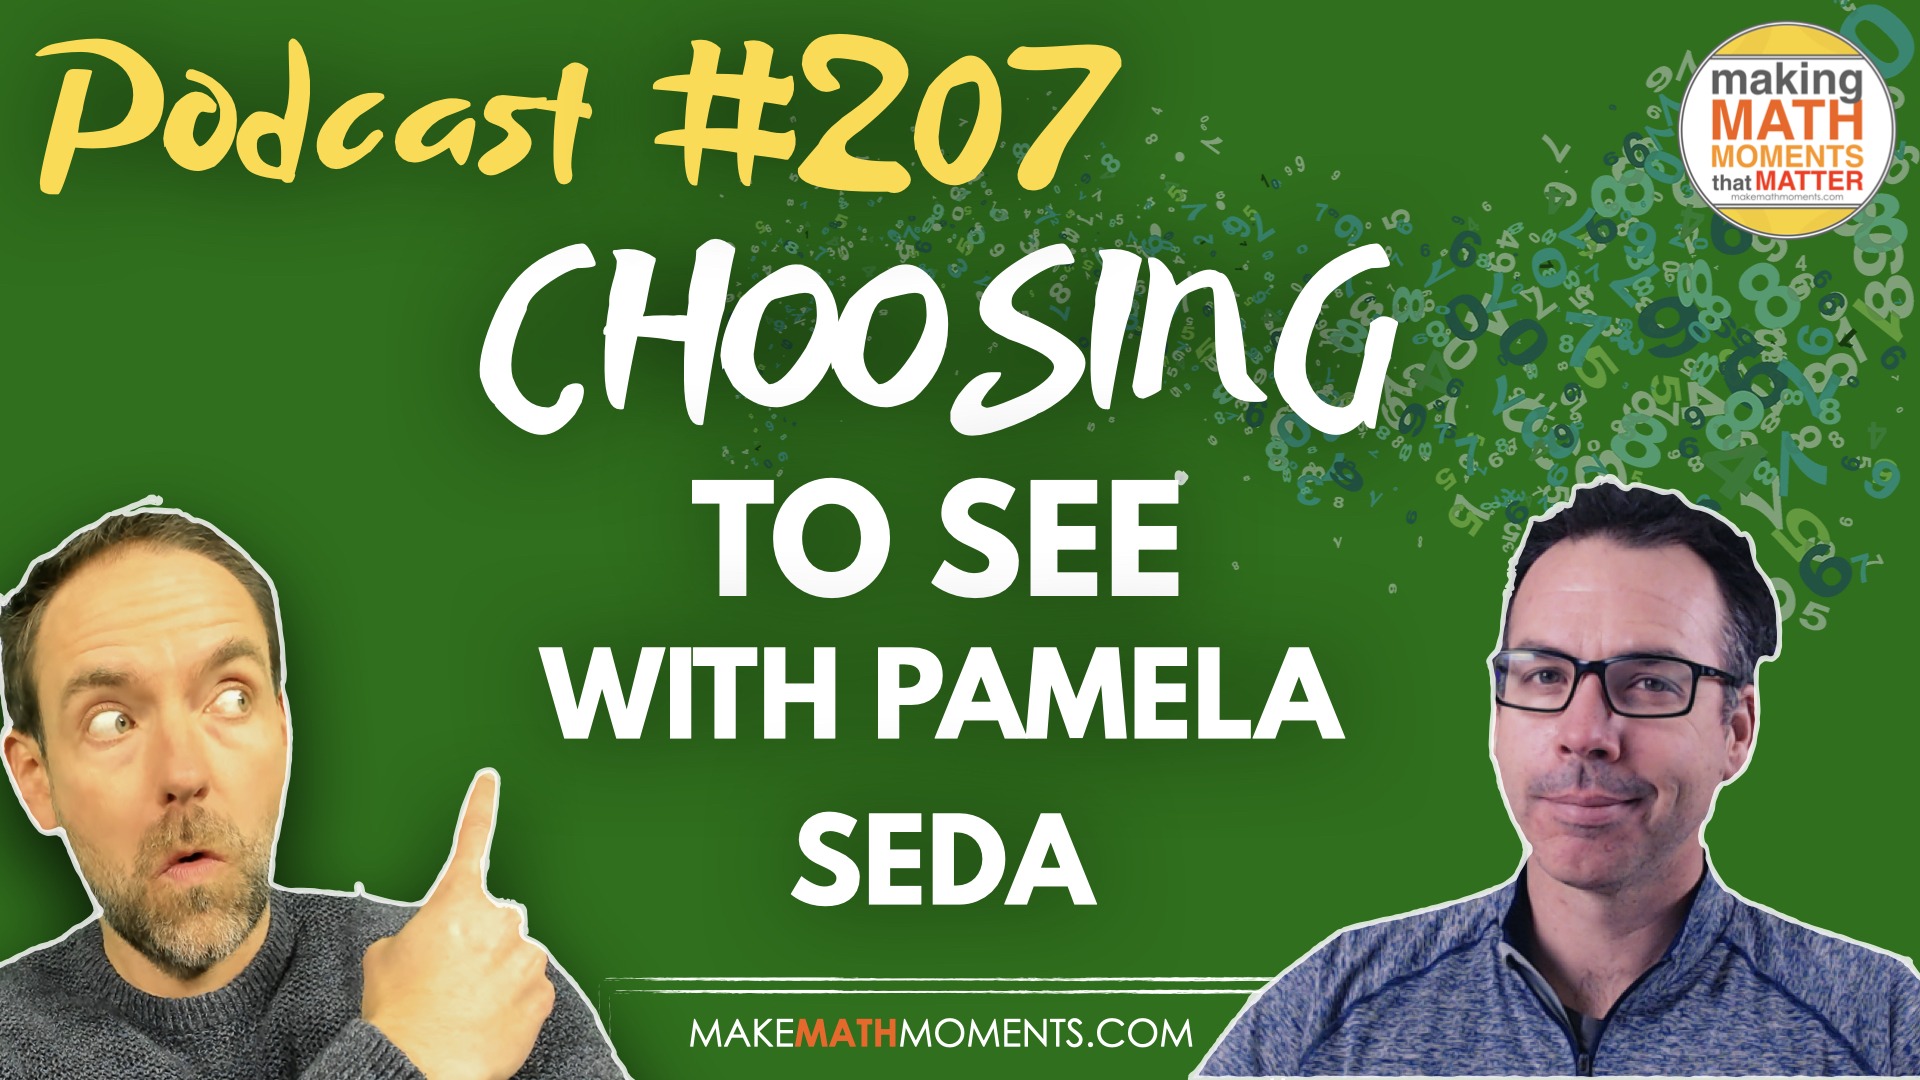 Episode 207: Choosing To See: An Interview with Pamela Seda